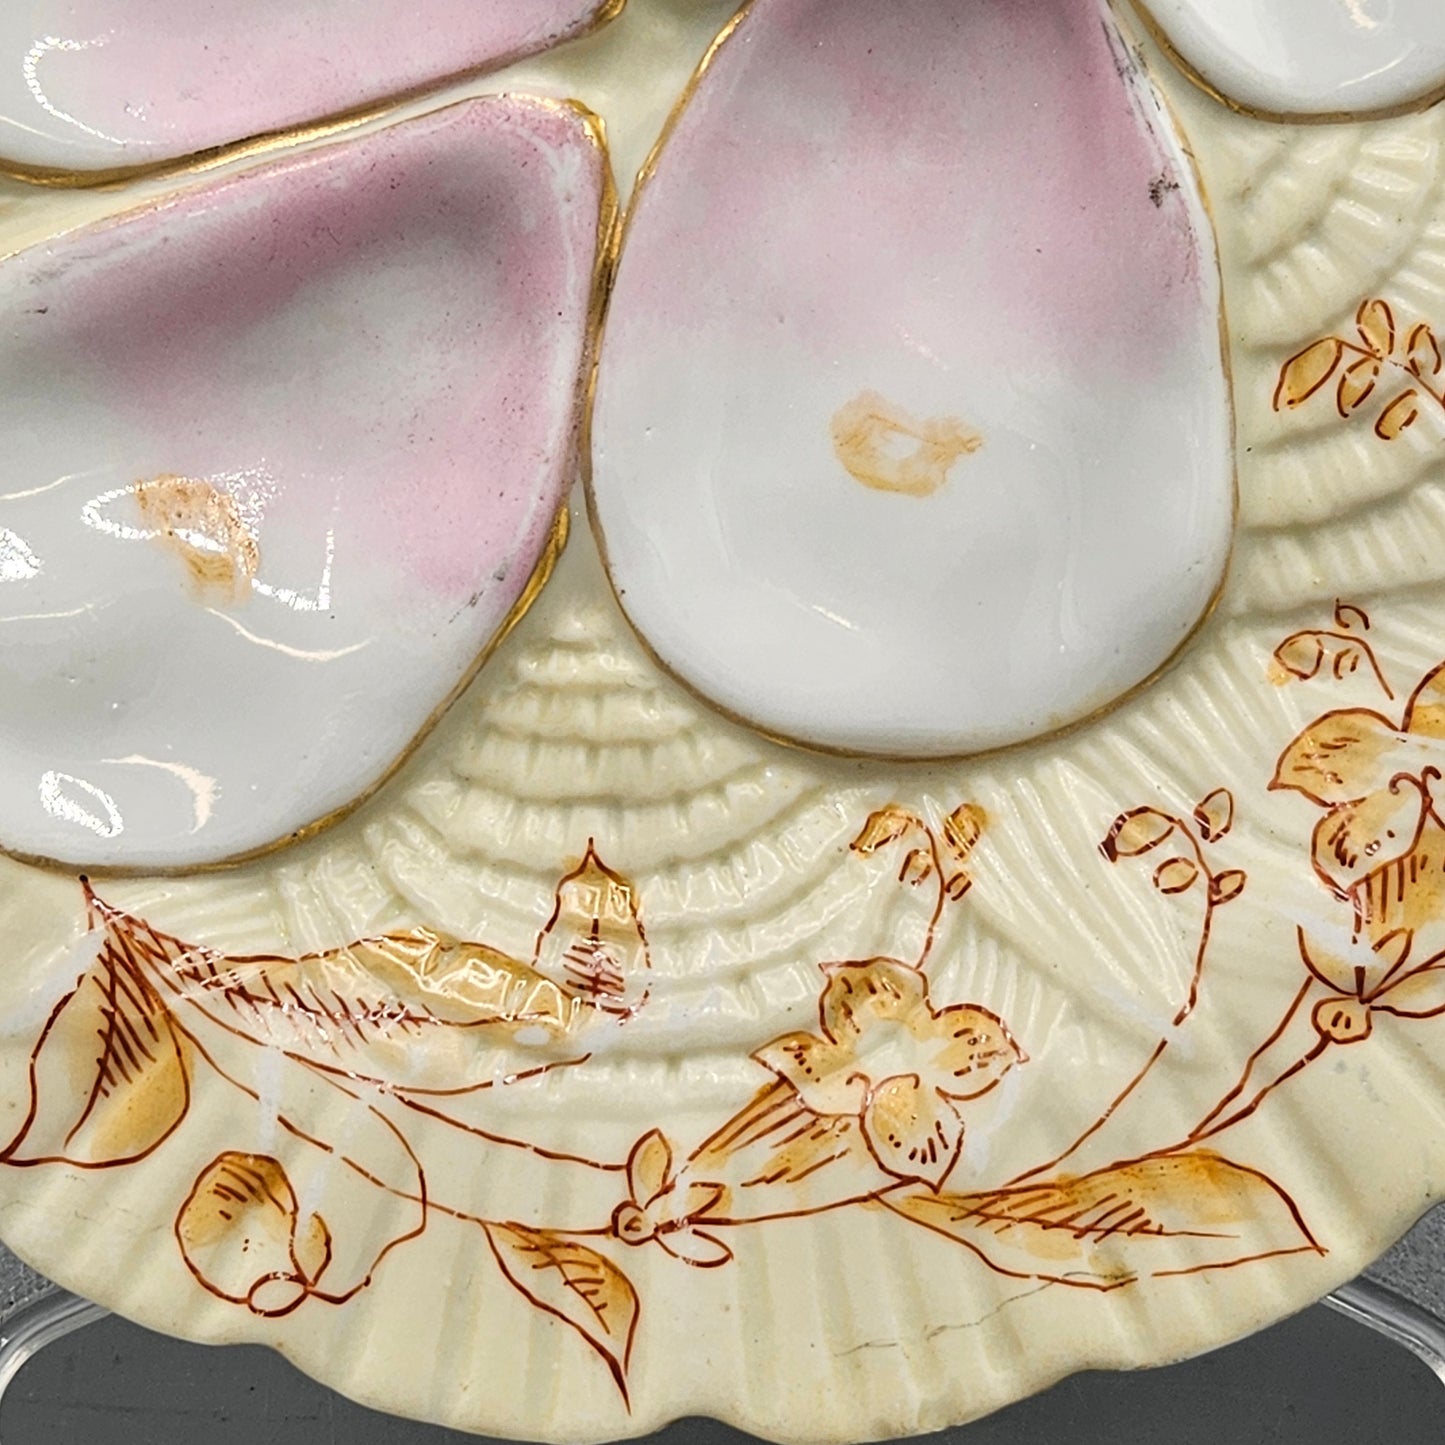 Limoges Porcelain Oyster Plate - Pale Yellow Ground